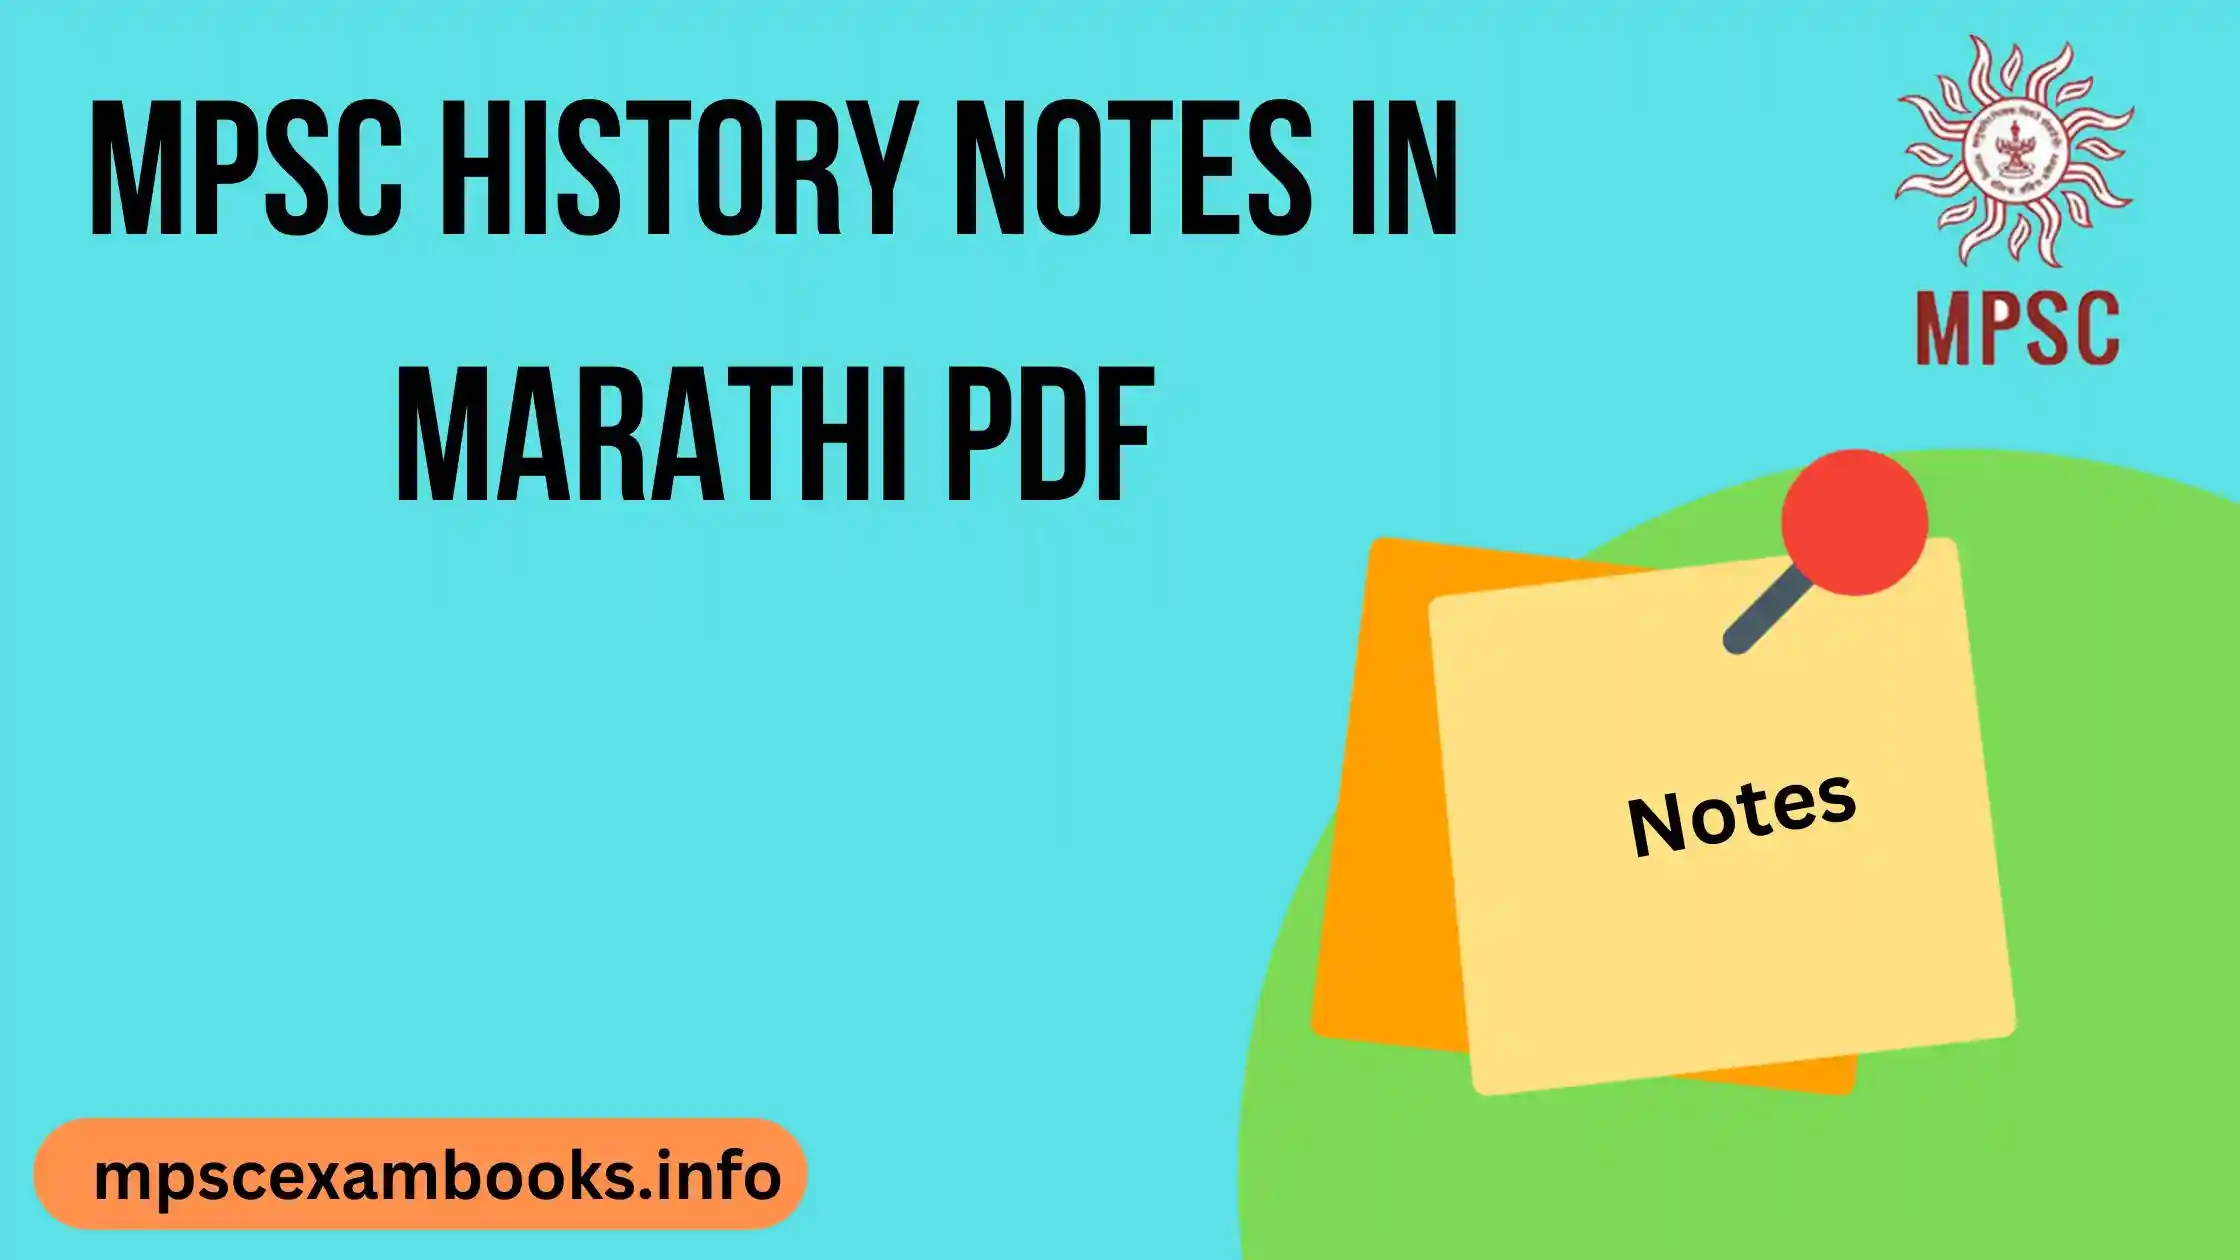 MPSC history notes in Marathi